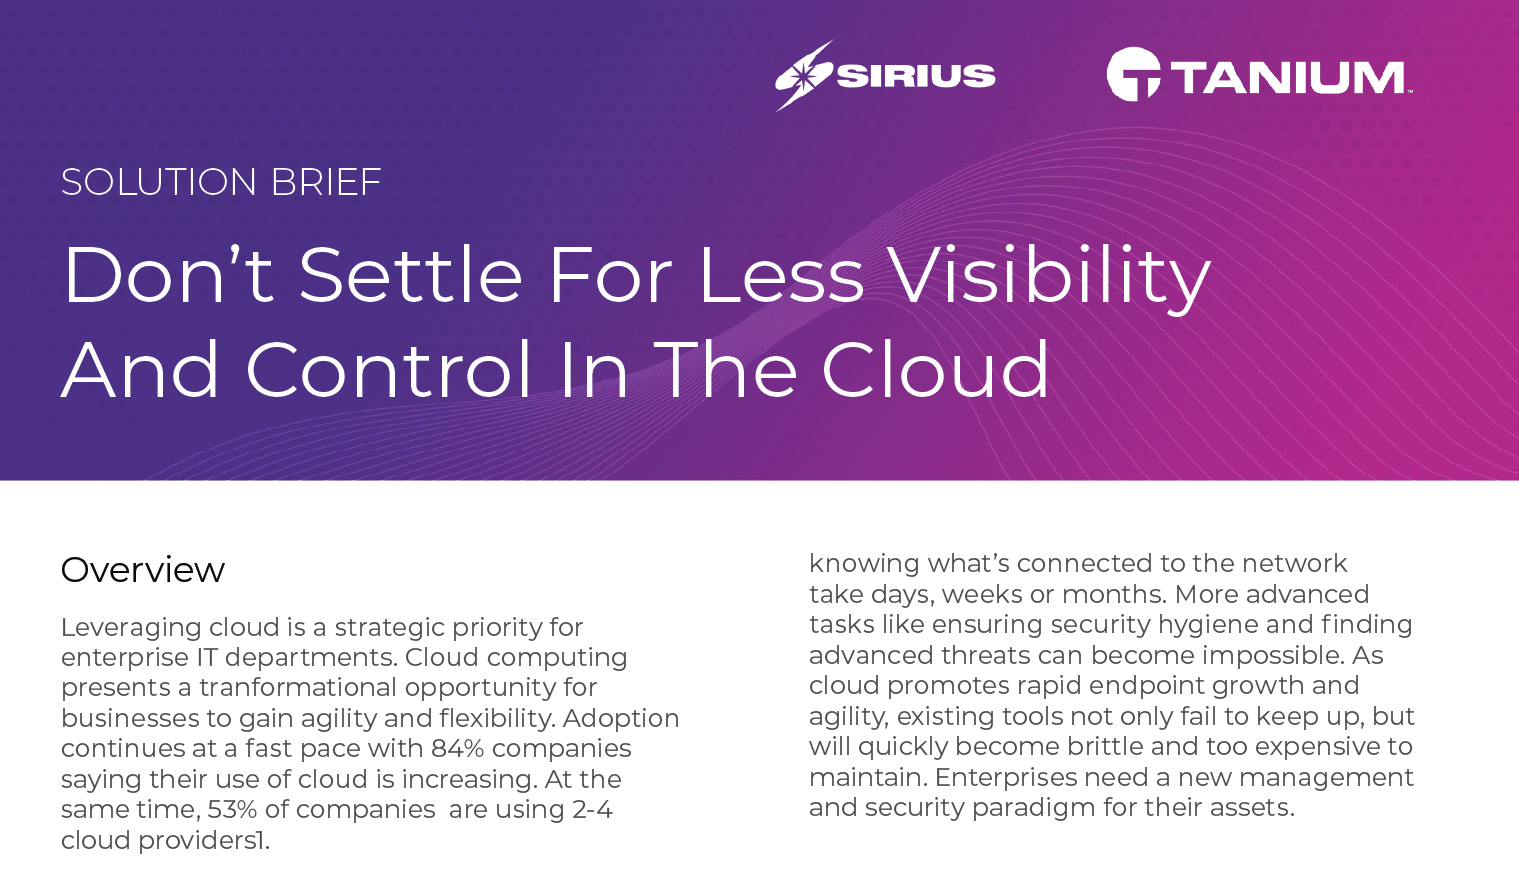 Solution Brief: Don't Settle For Less Visibility And Control In The Cloud